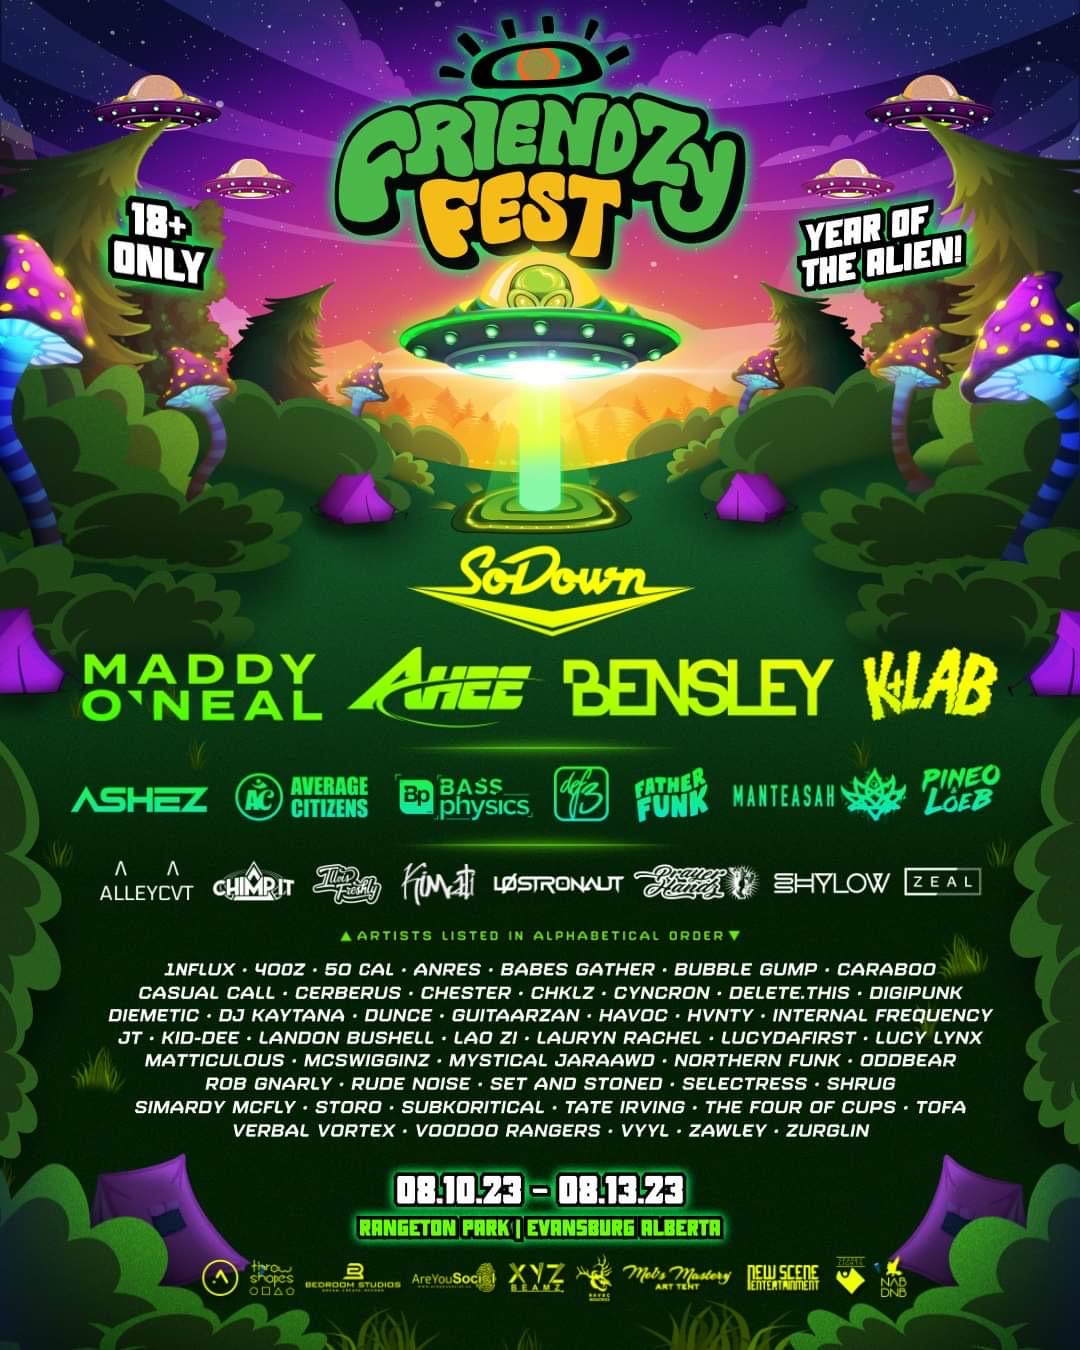 Friendzy Fest Festival Lineup, Dates and Location